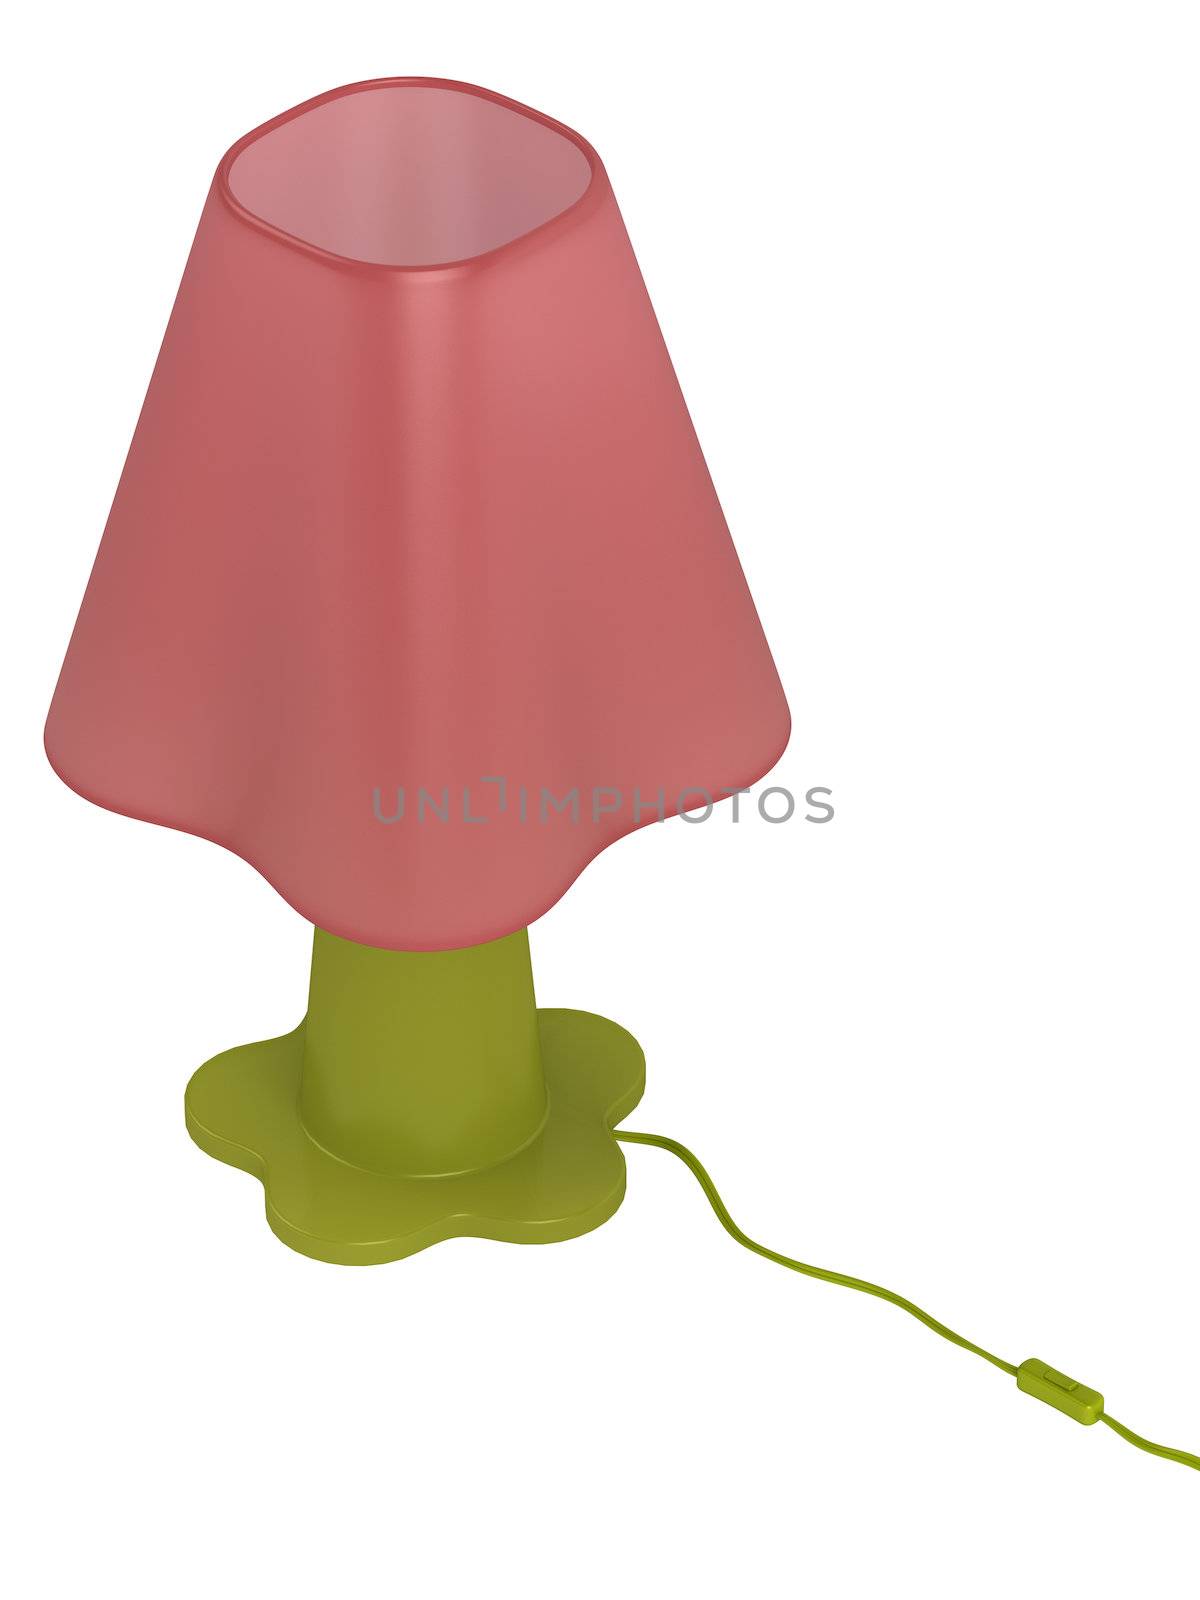 Modern green table lamp with a pink shade and switch isolated on a white background